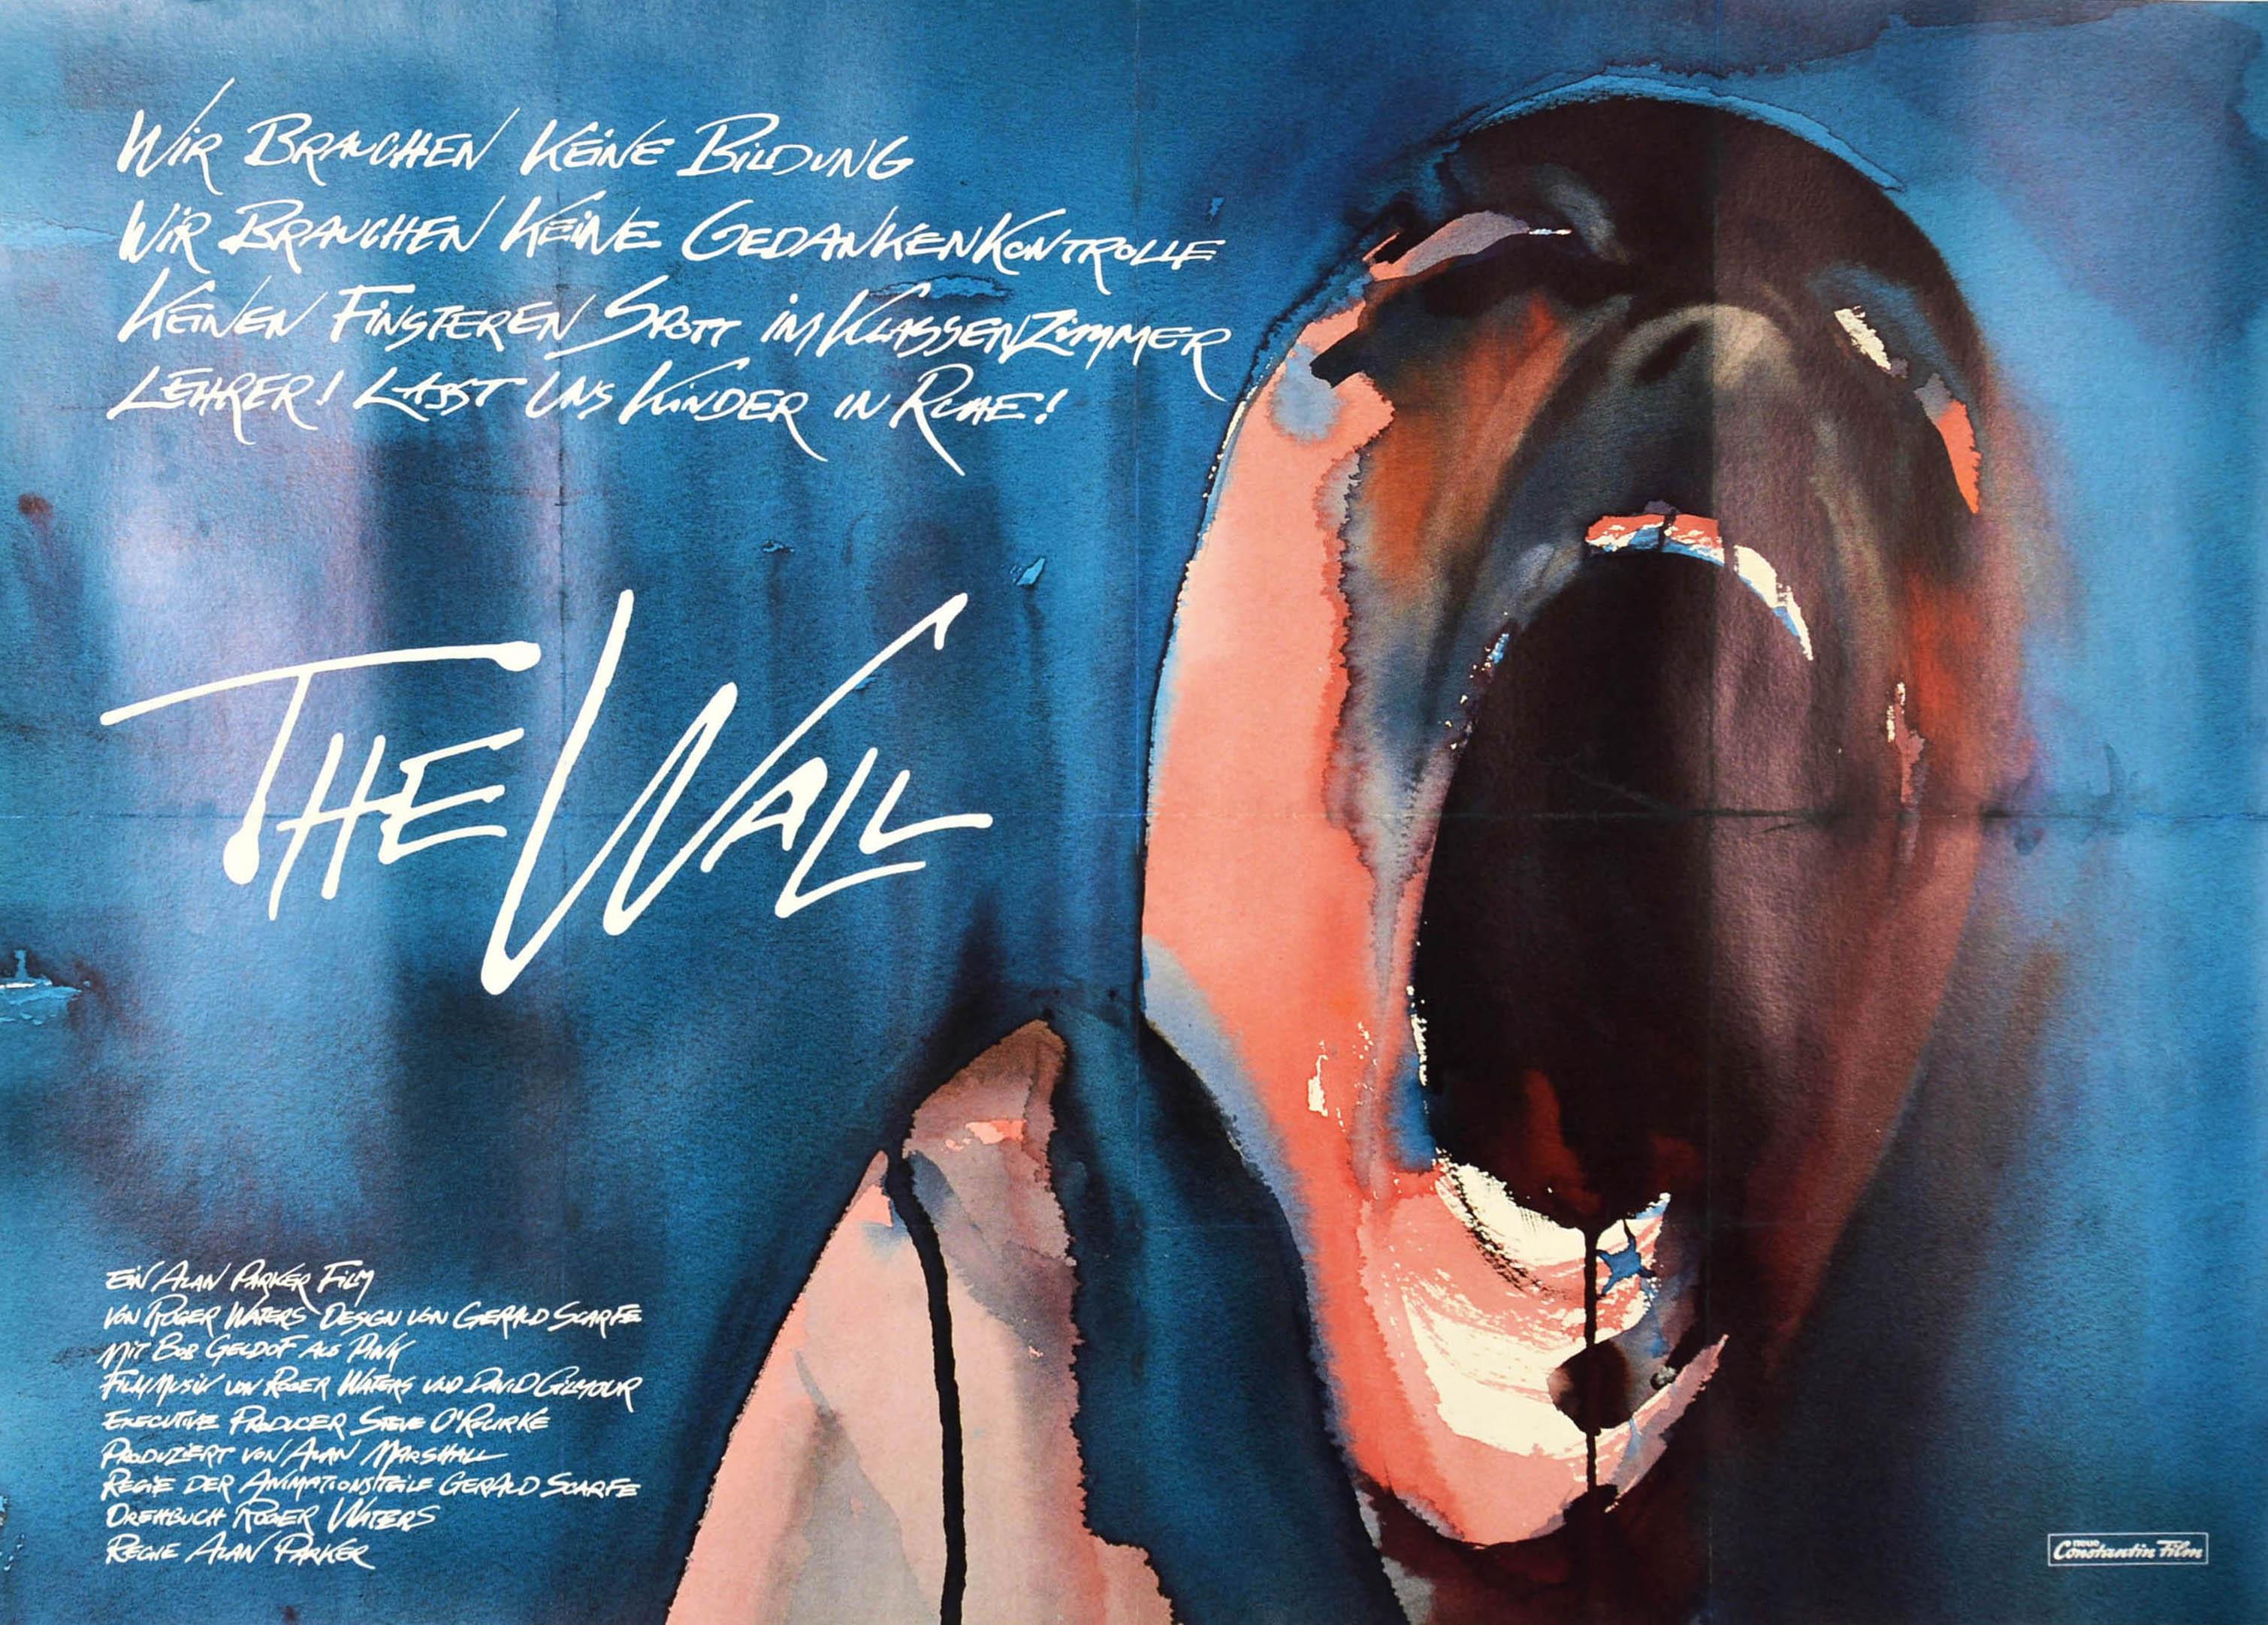 Print Gerald Scarfe - Affiche vintage d'origine Pink Floyd Another Brick In The Wall Rock Music, Film d'art